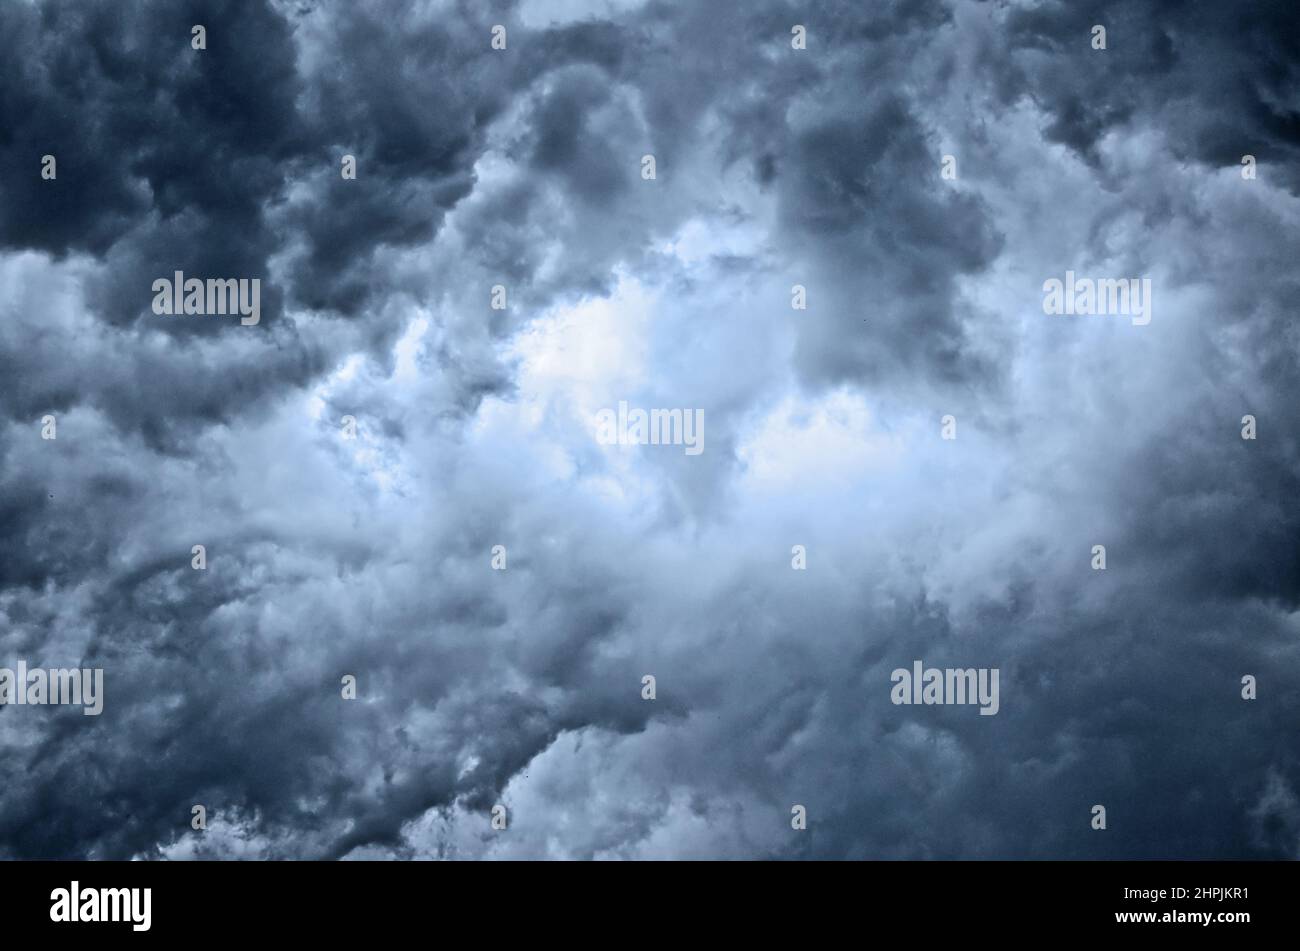 upcoming storm with dramtic sky Stock Photo